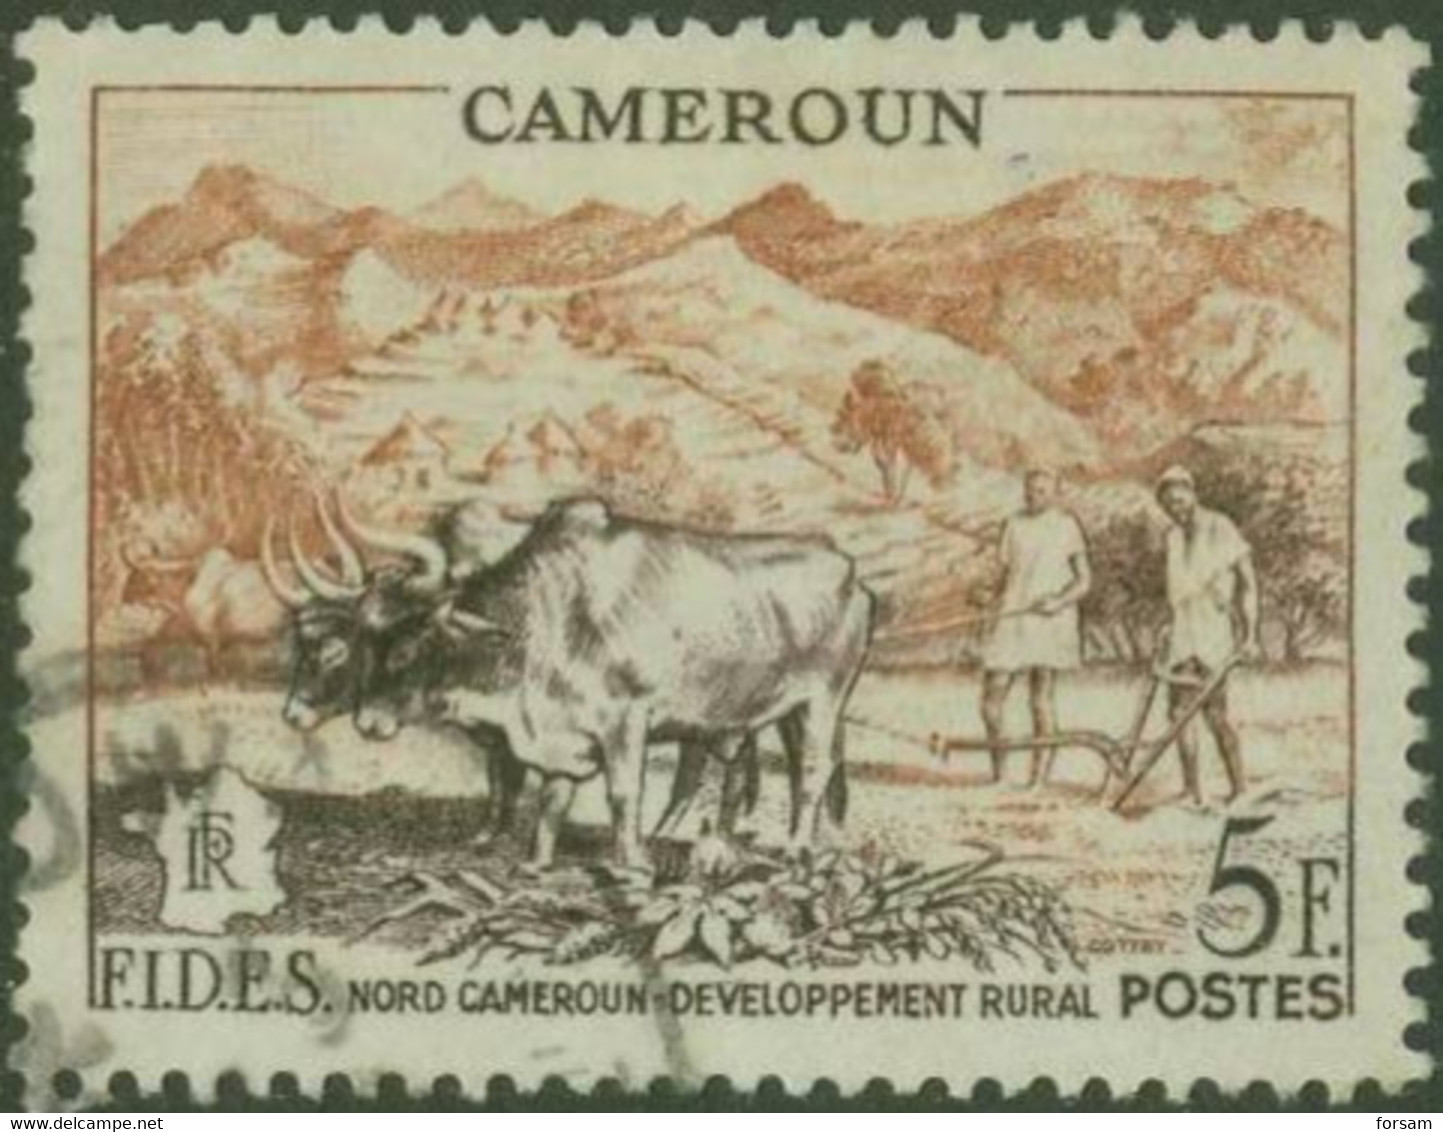 CAMEROON..1954..Michel # 312...used. - Used Stamps